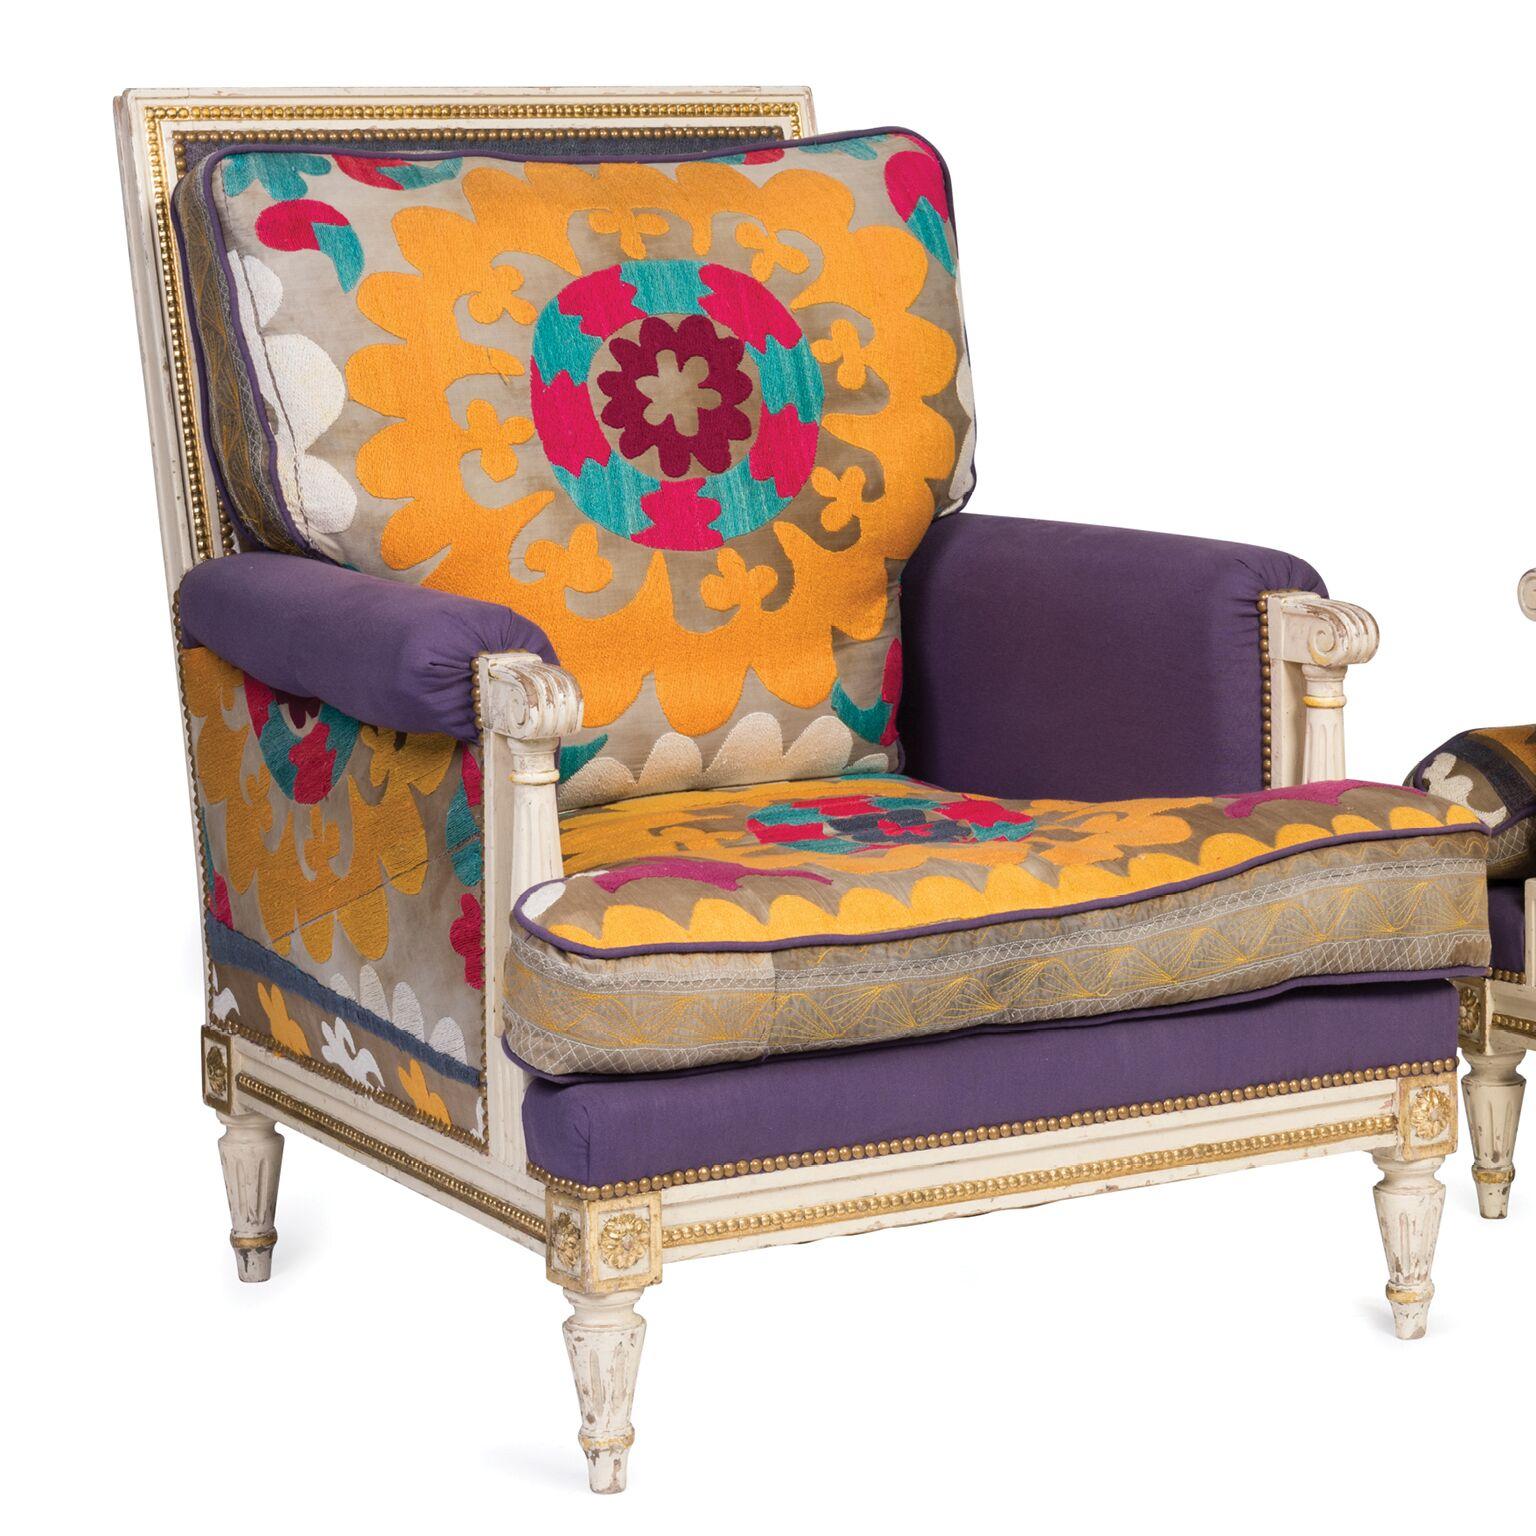 An exceptional pair of white and gilt decorated Louis XVI style armchairs, 
French, 19th century upholstered in striking gold, purple and cerise Uzbek tapestry.

Measures: 92 cm high, 78 cm wide, 88 cm deep.

These are fabulous chairs, both